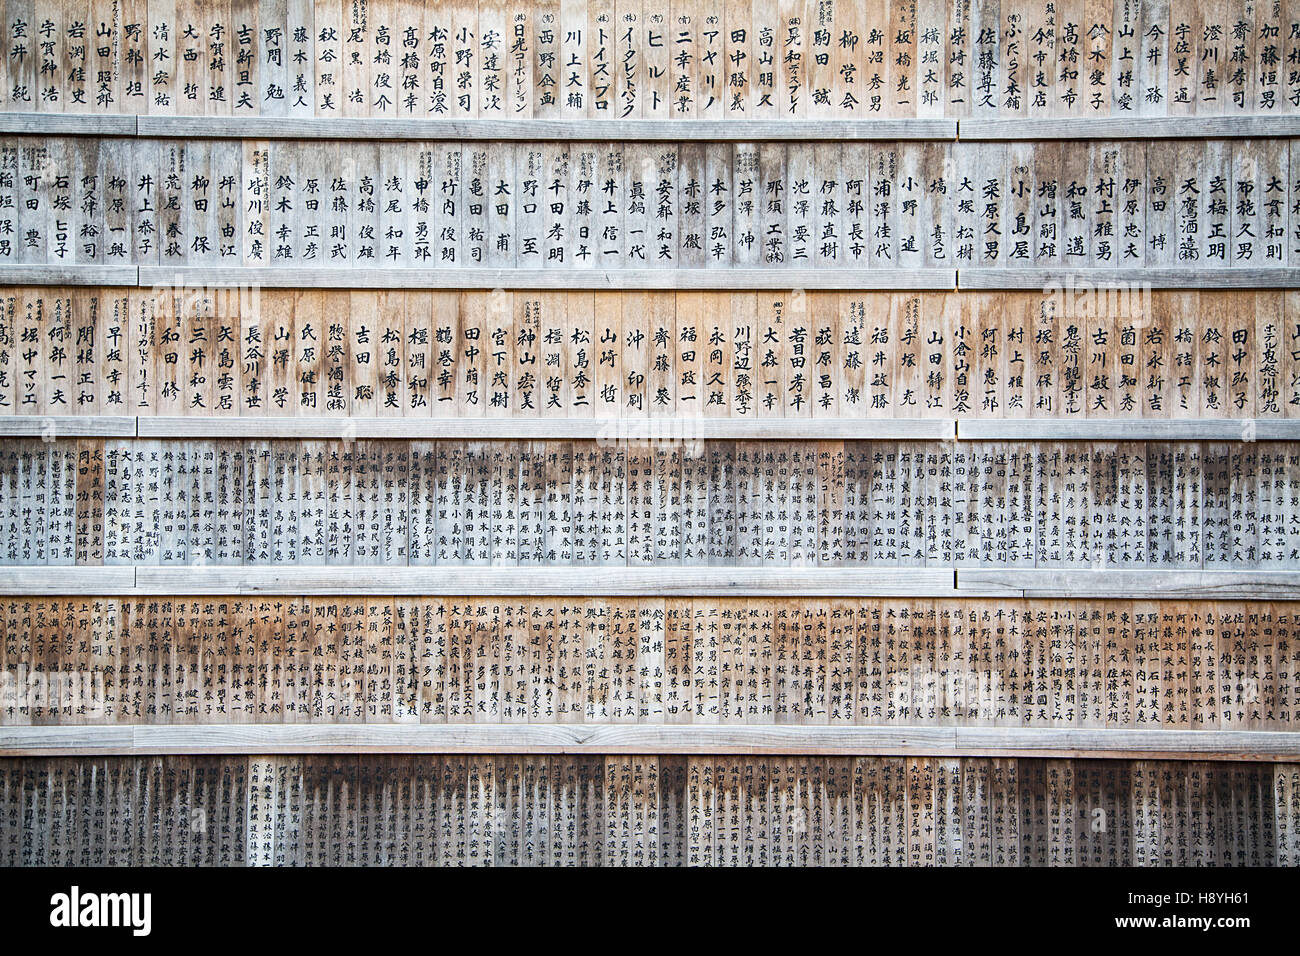 NIKKO, JAPAN - OCTOBER 5, 2016: Wooden boards with Japanese script outside of temple in Nikko, Japan. Nikko shrines and temples Stock Photo